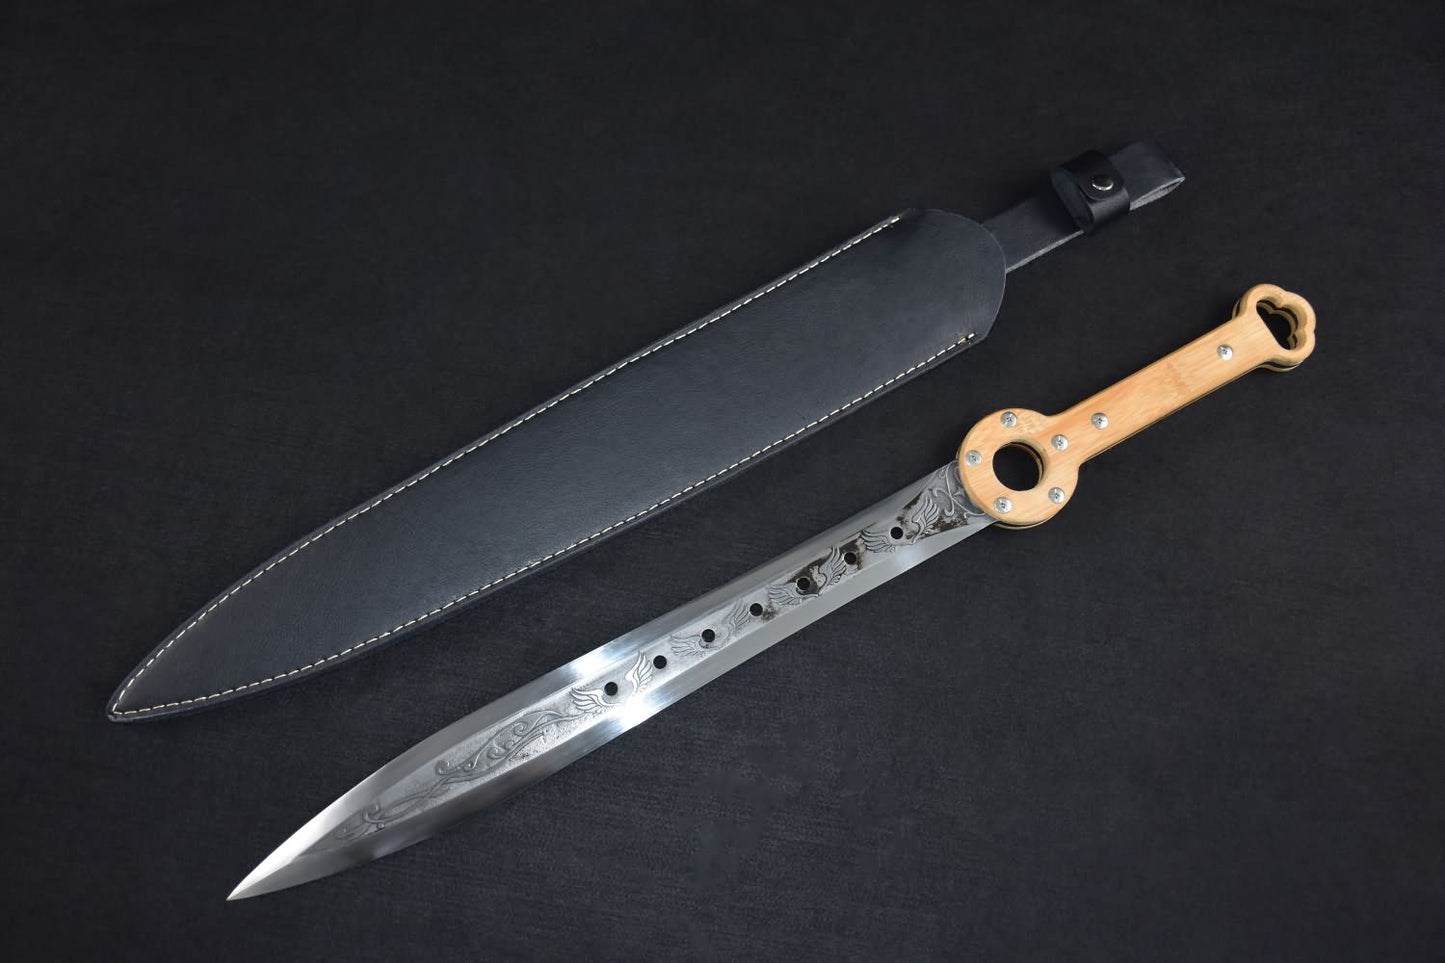 Full tang sword,High carbon steel blade,Leather scabbard - Chinese sword shop